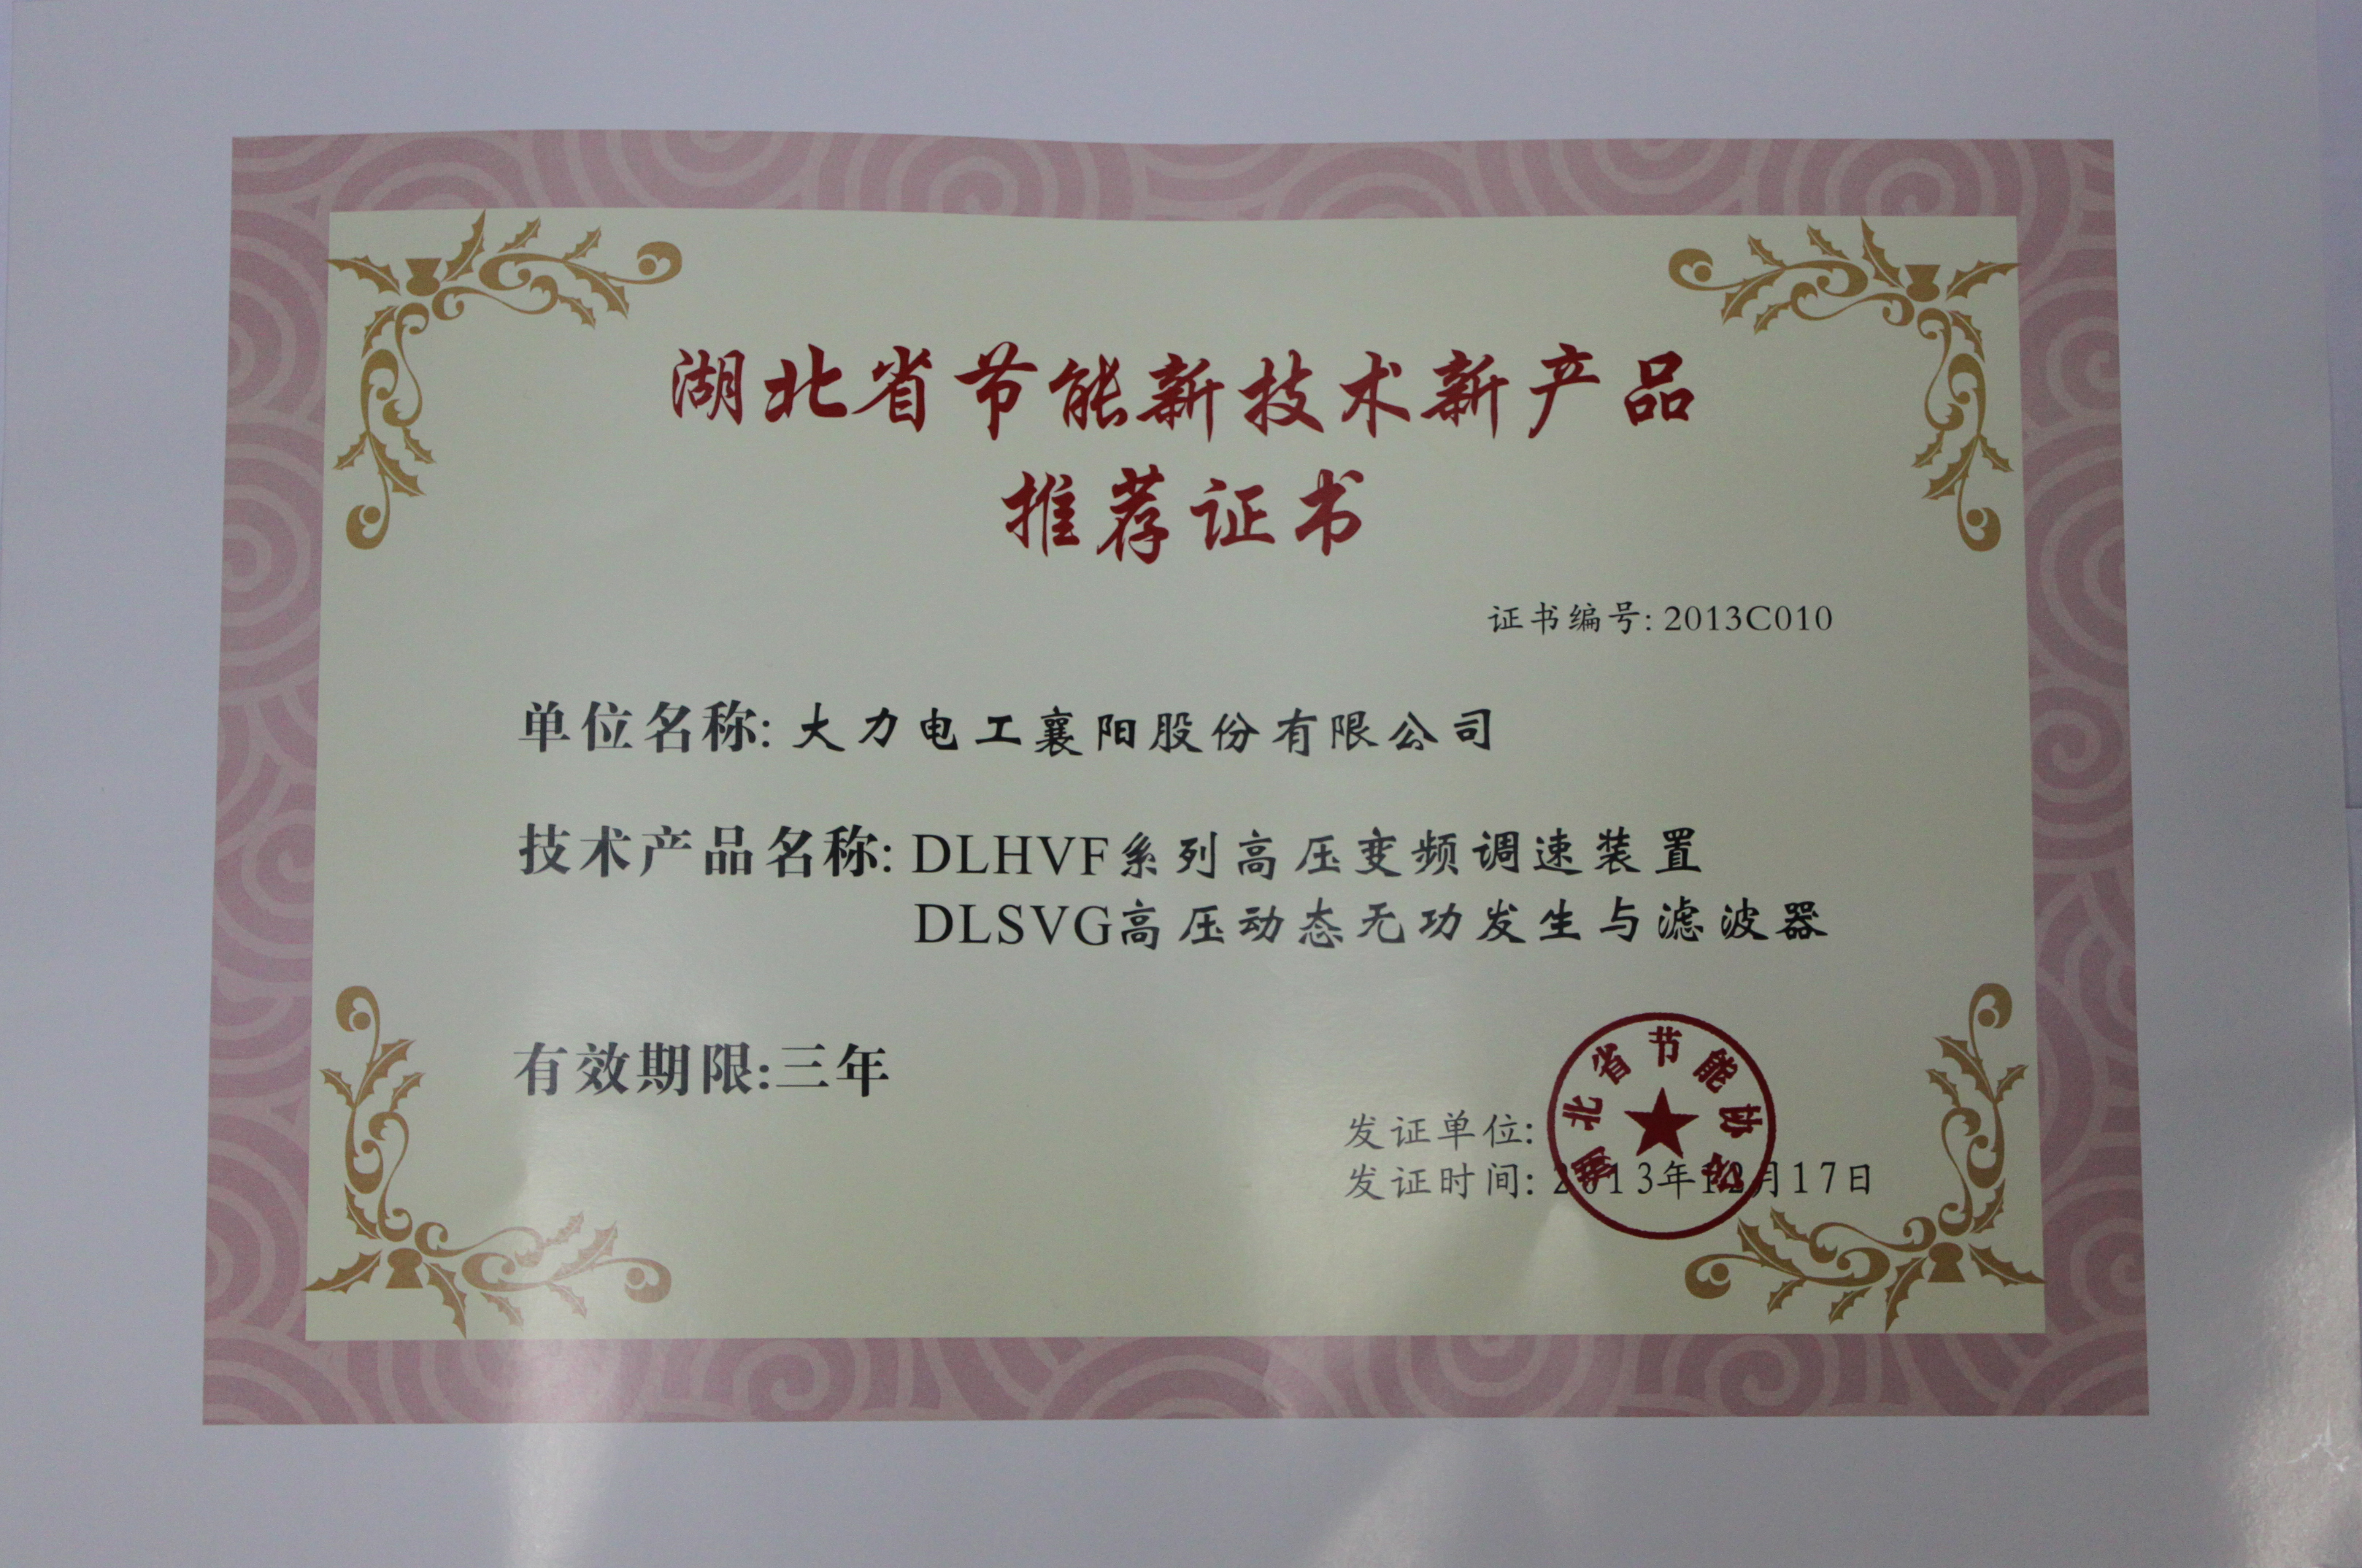 Certificates of energy saving new technical product commendation